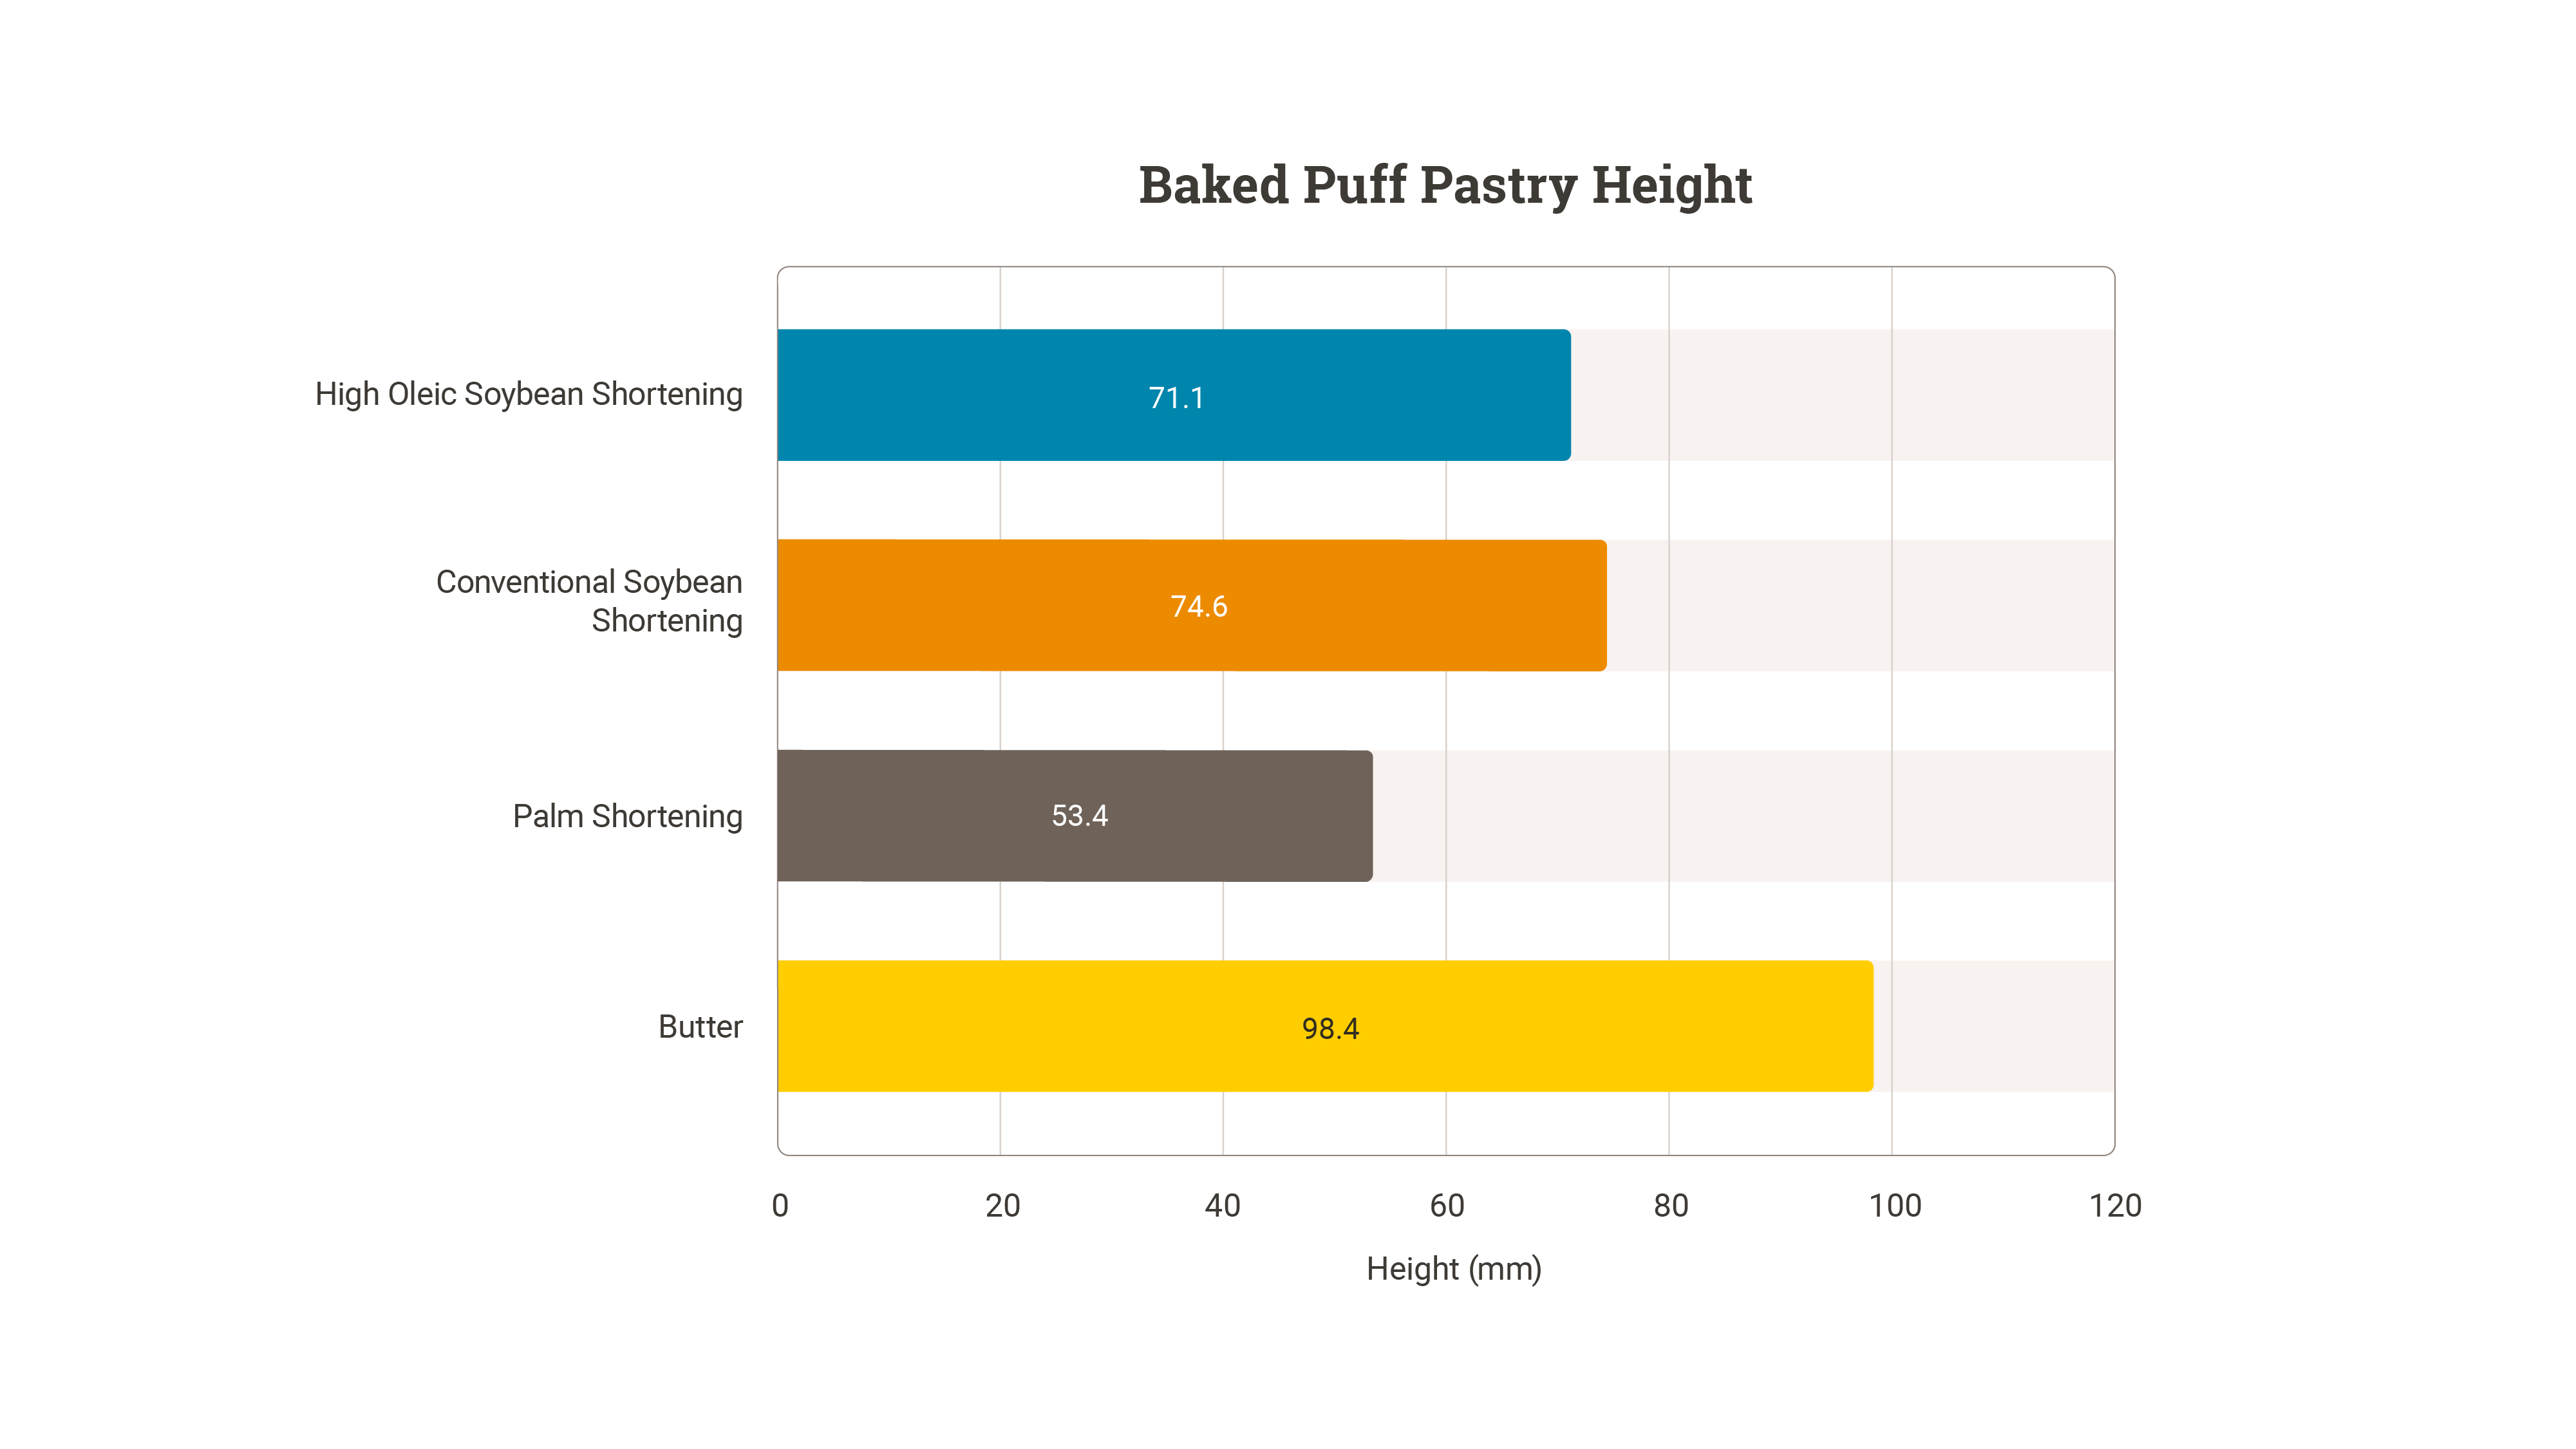 Baked Puff Pastry Height